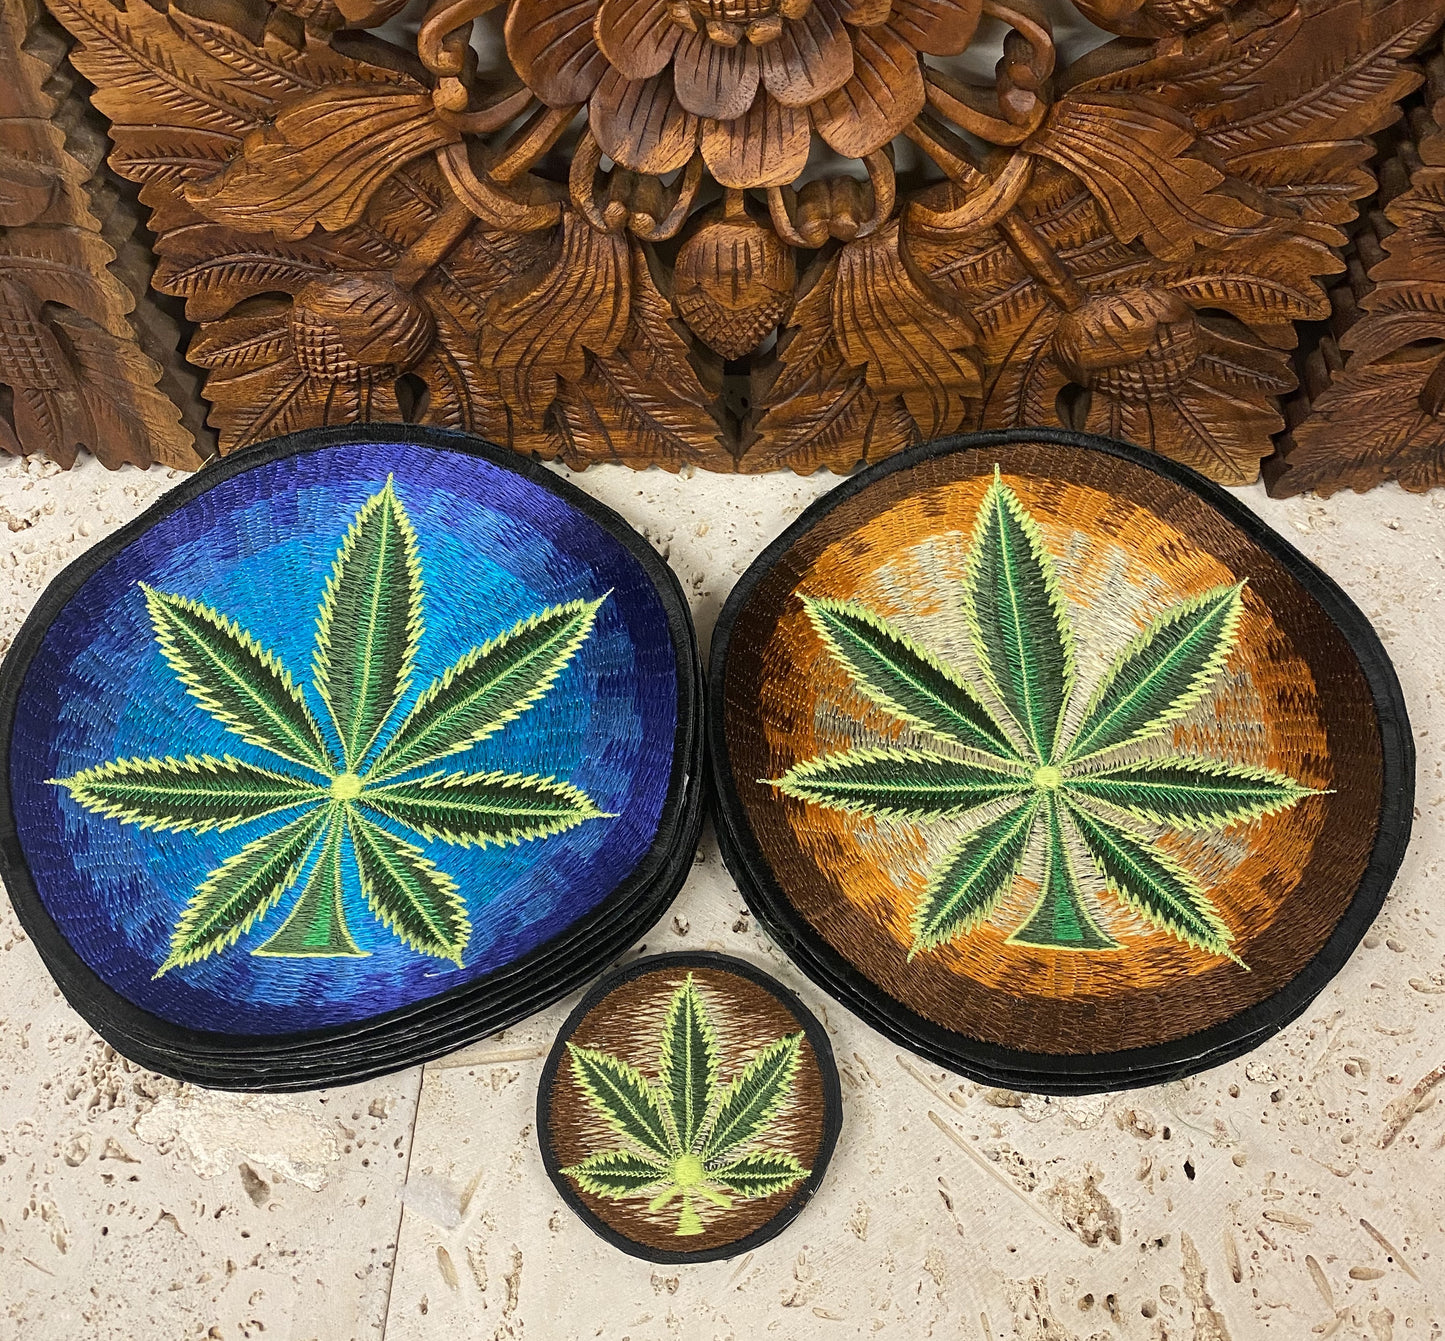 Handmade Embroidered Cannabis Leaf Patches